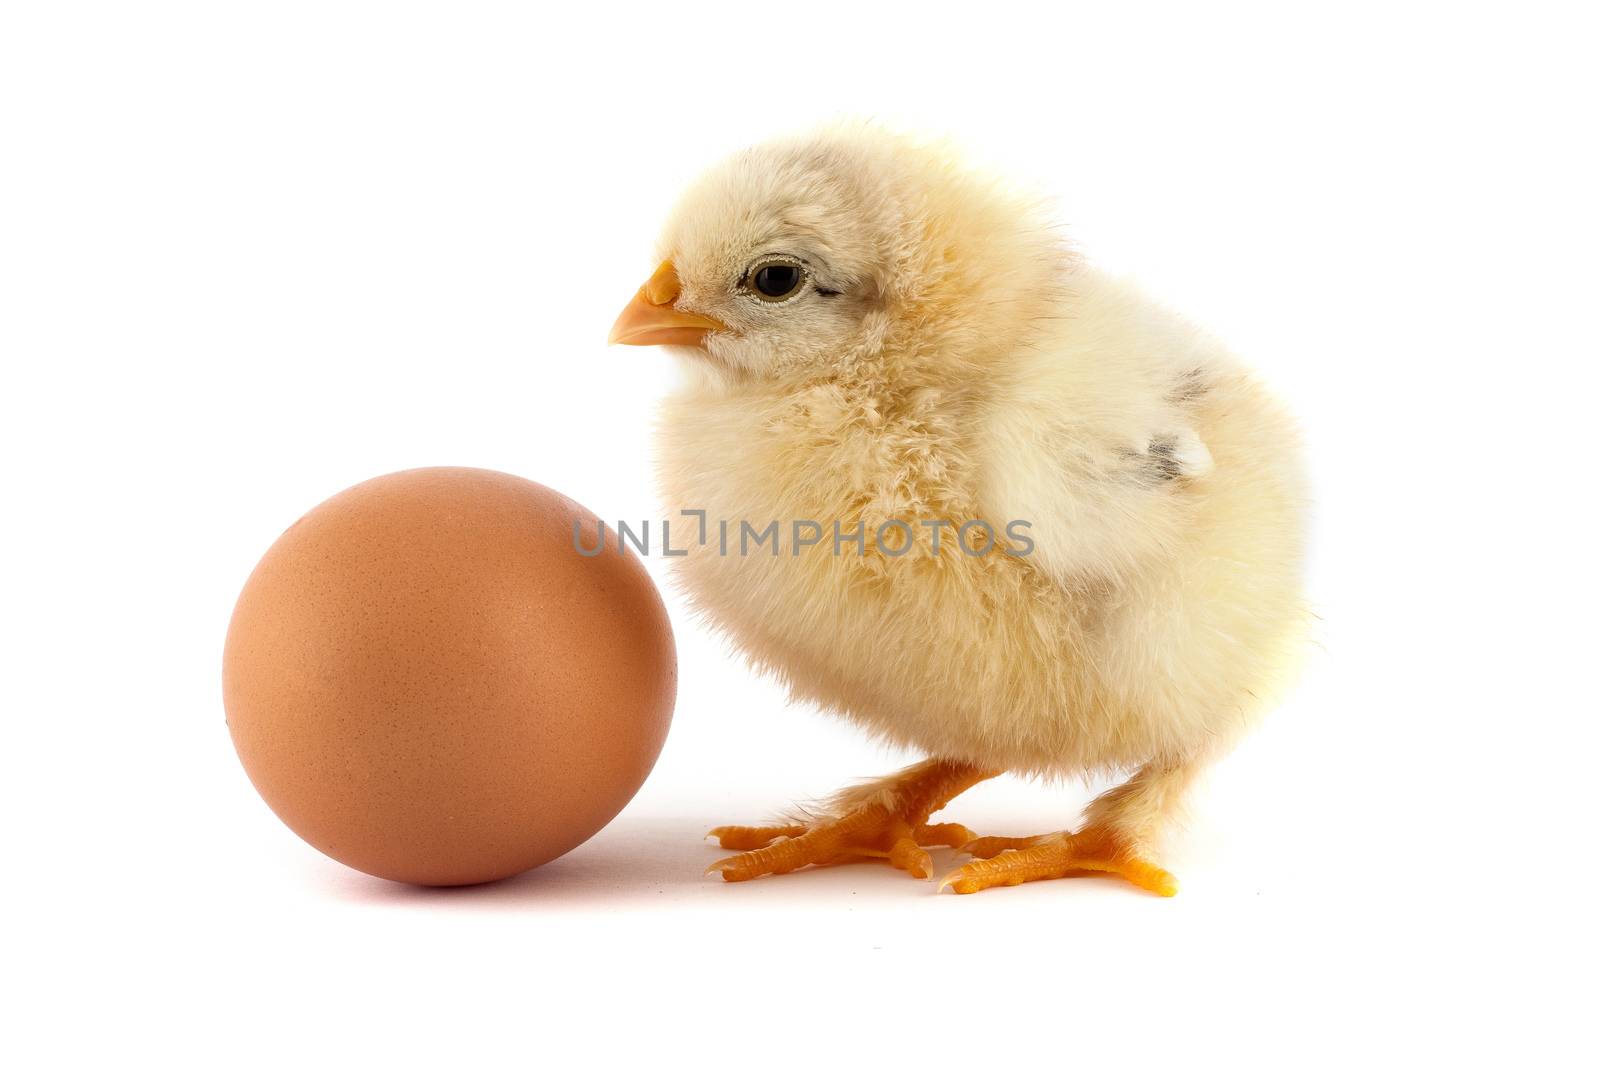 The yellow small chicks with egg isolated on a white background